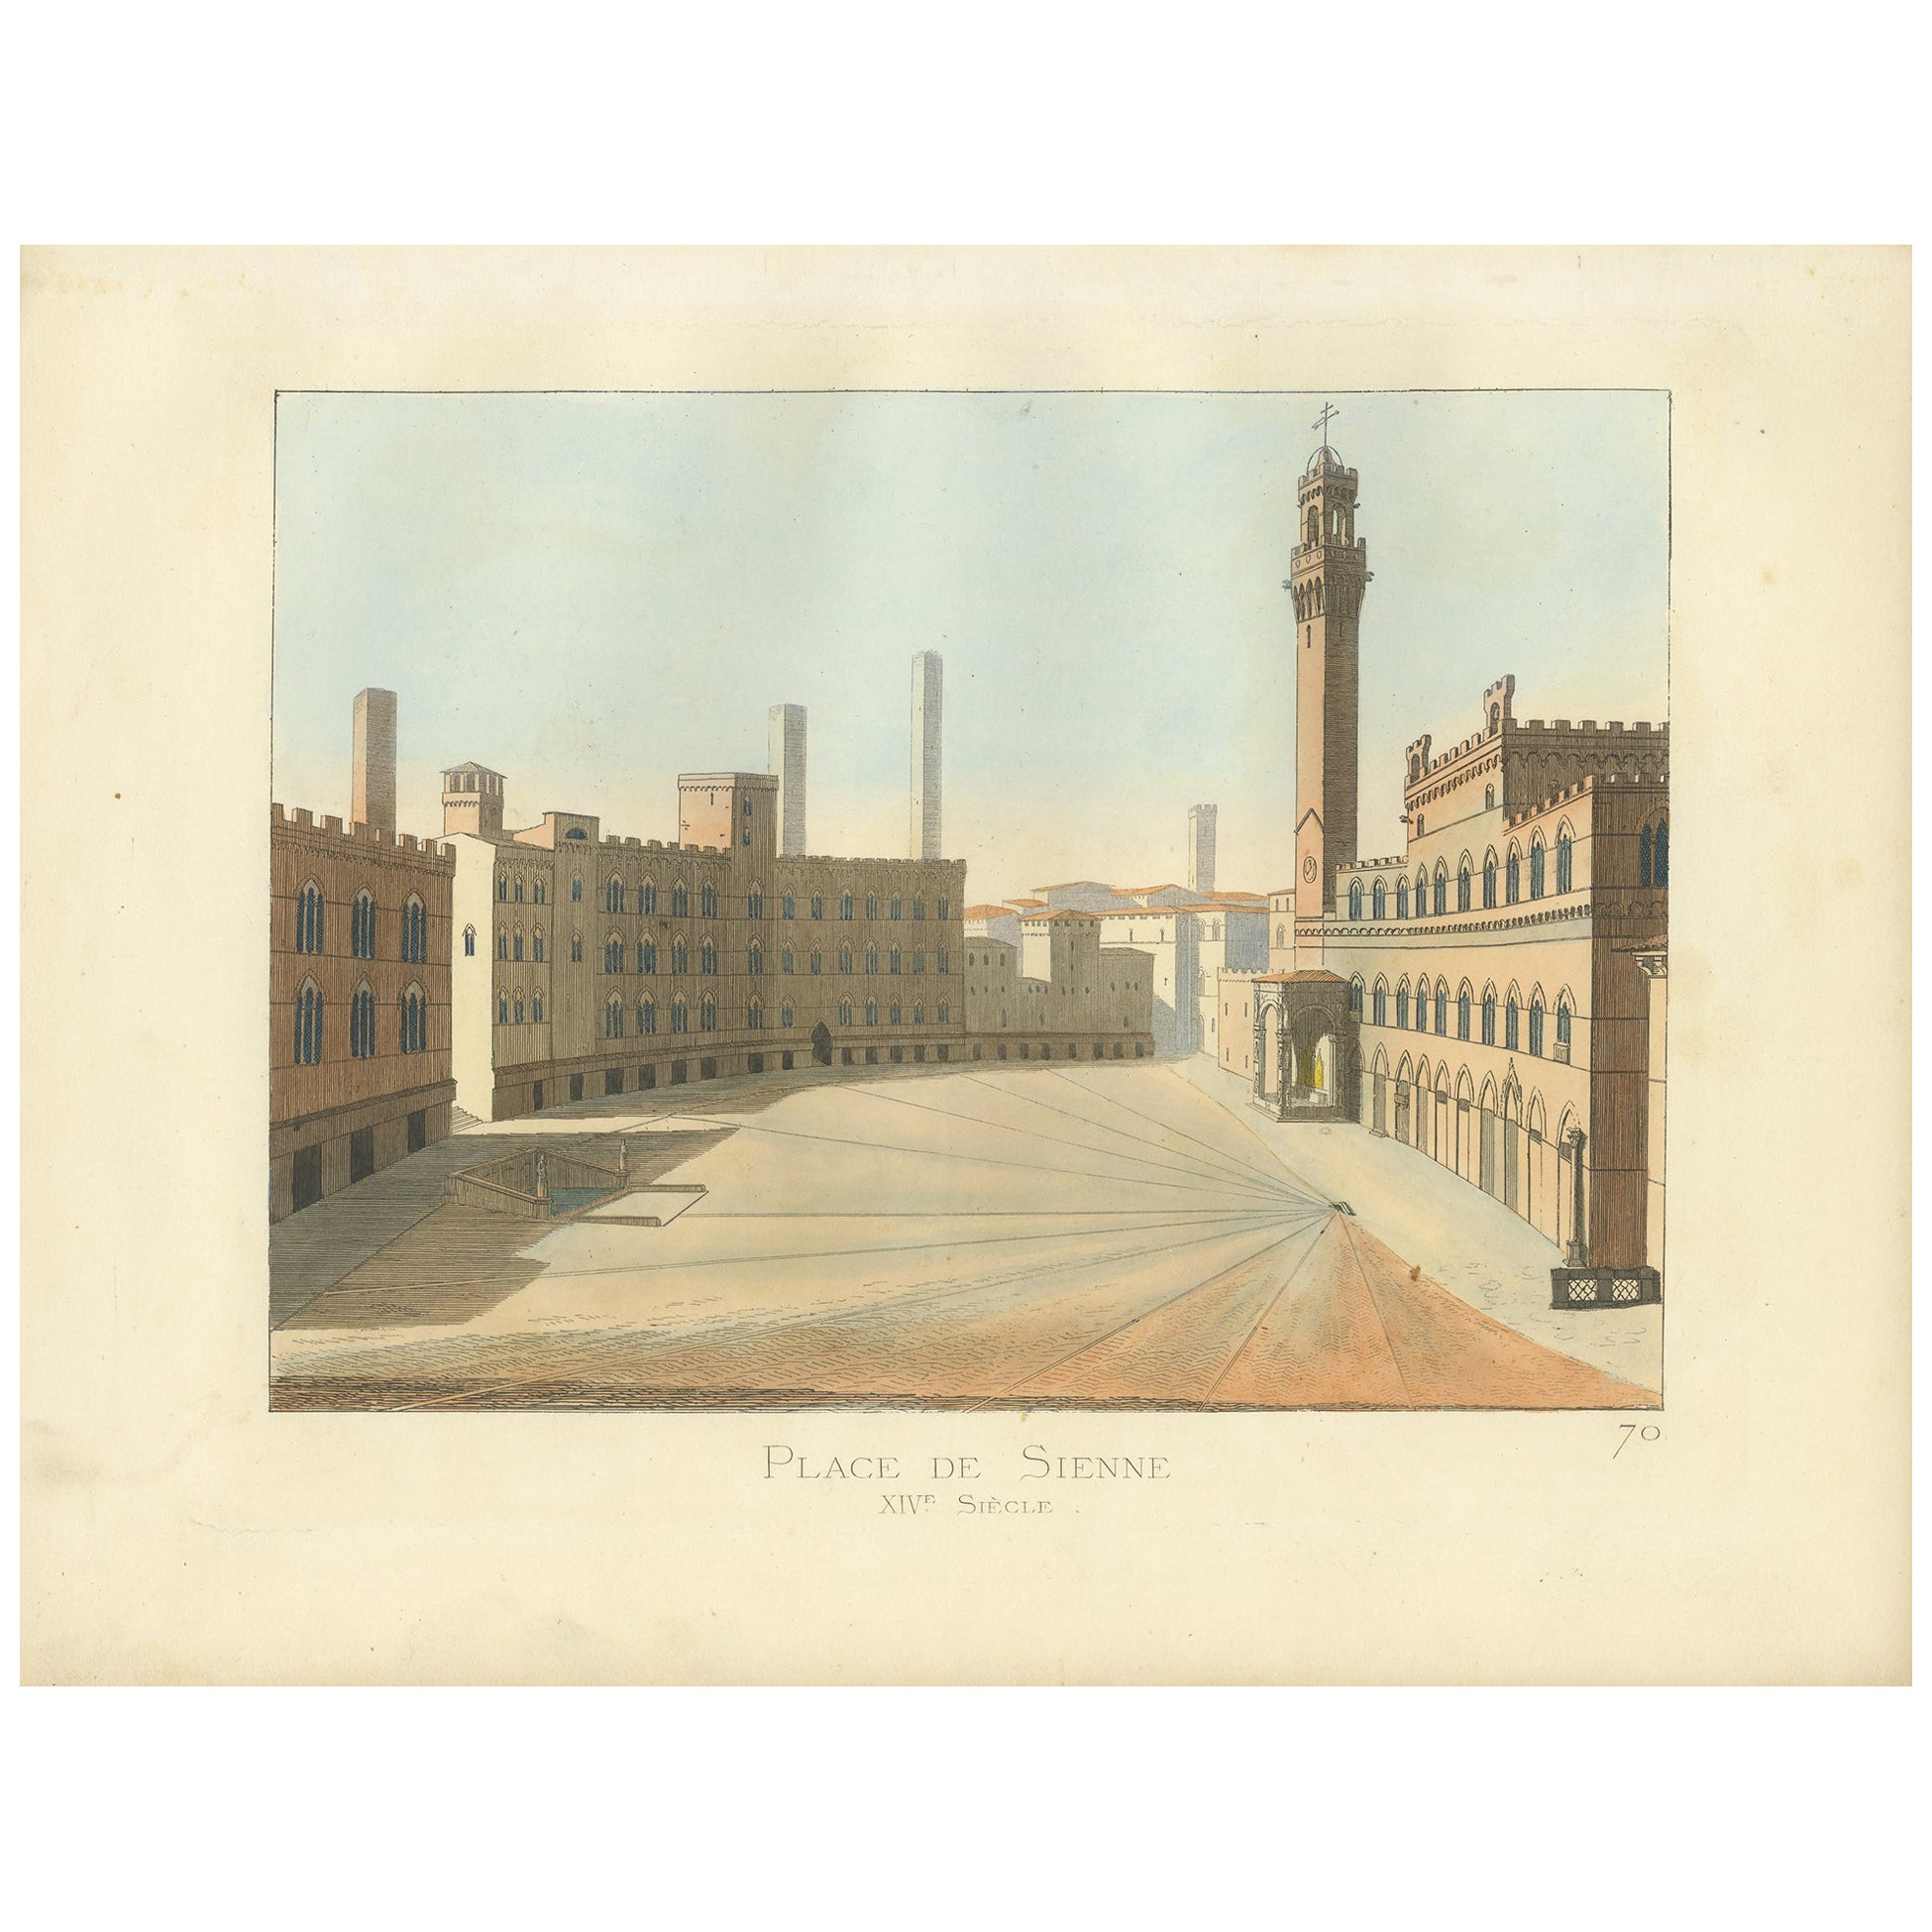 Antique Print of the Piazza del Campo by Bonnard, 1860